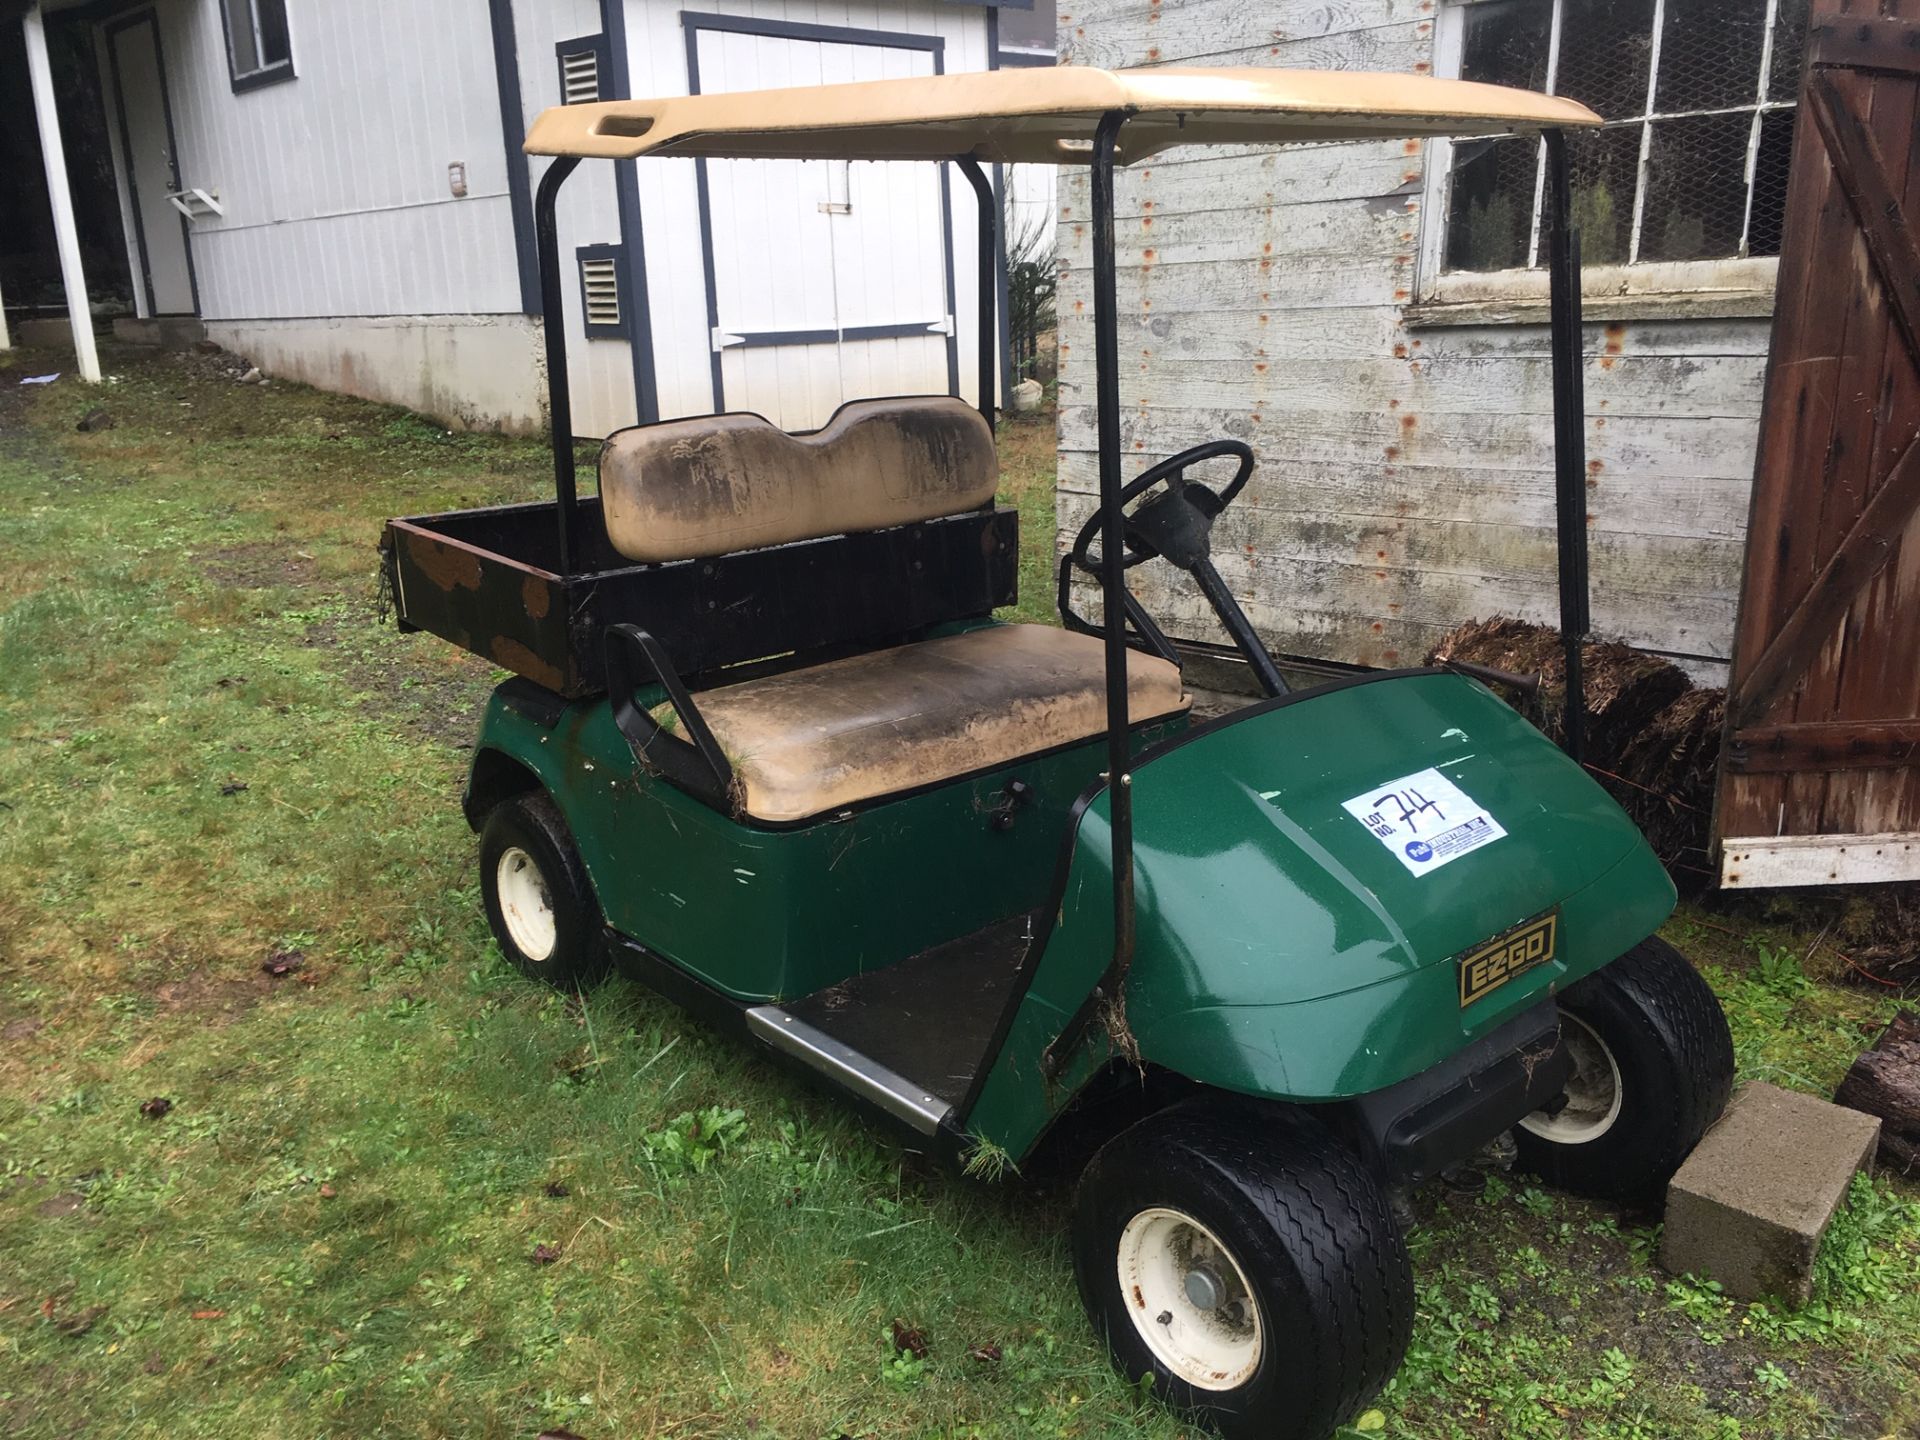 EZ-Go Golf Cart (Includes 6 Trojan Batteries not known if operational)